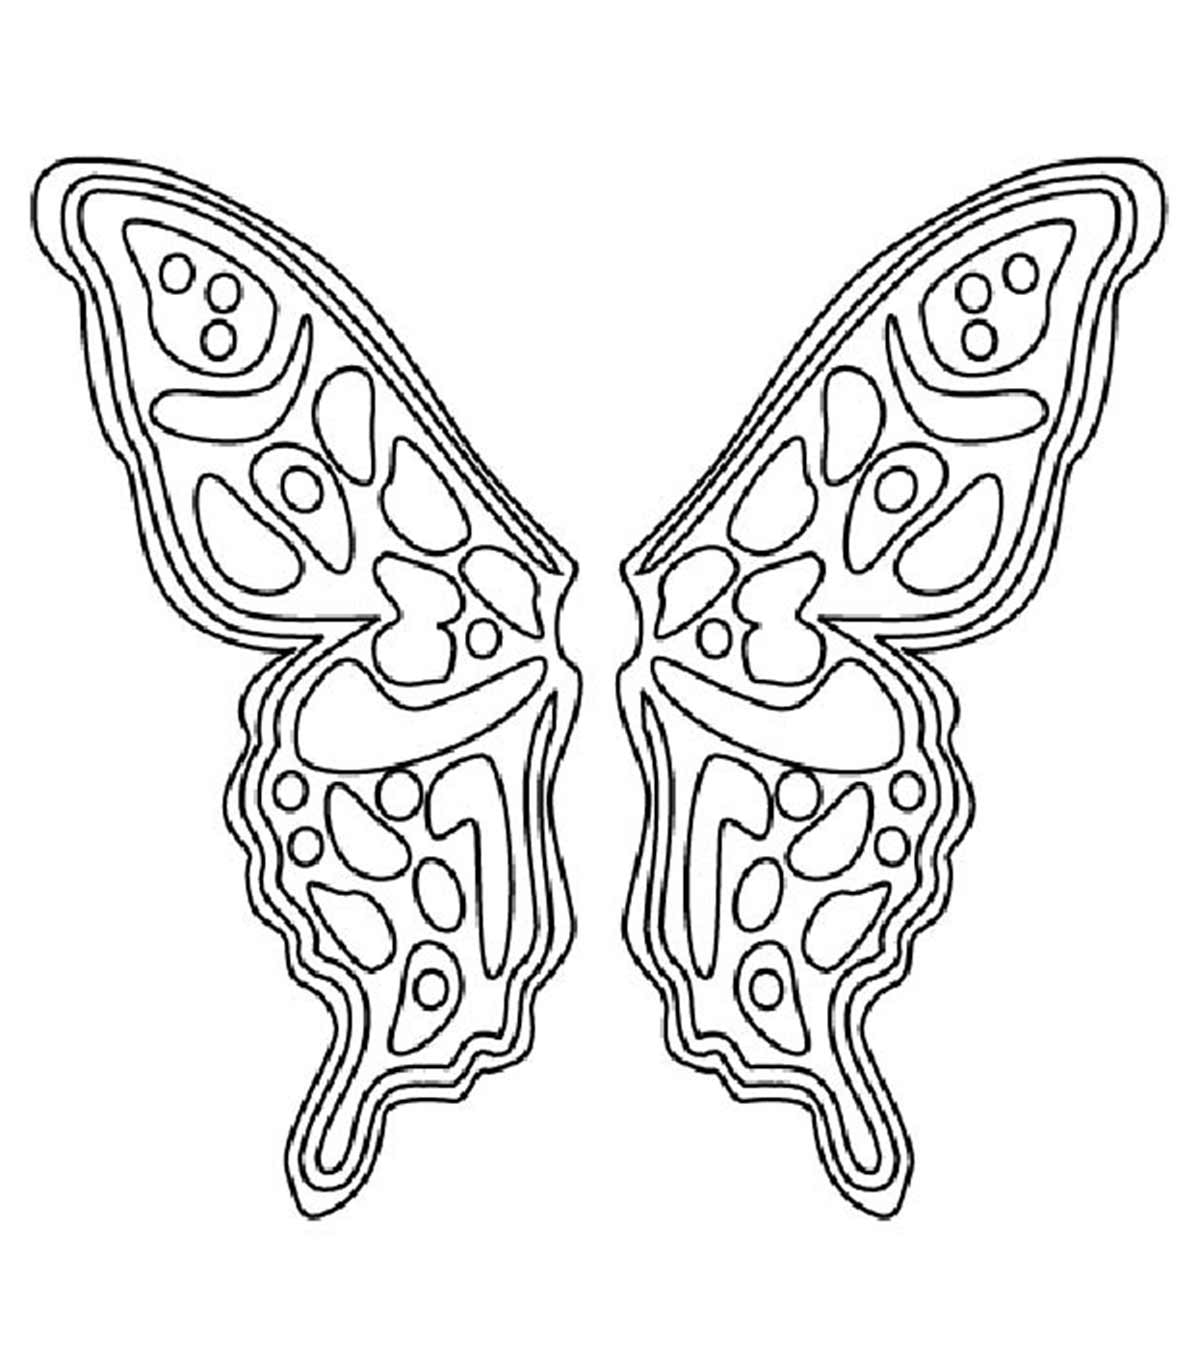 Top 20 Pattern Coloring Pages For Your Toddler_image